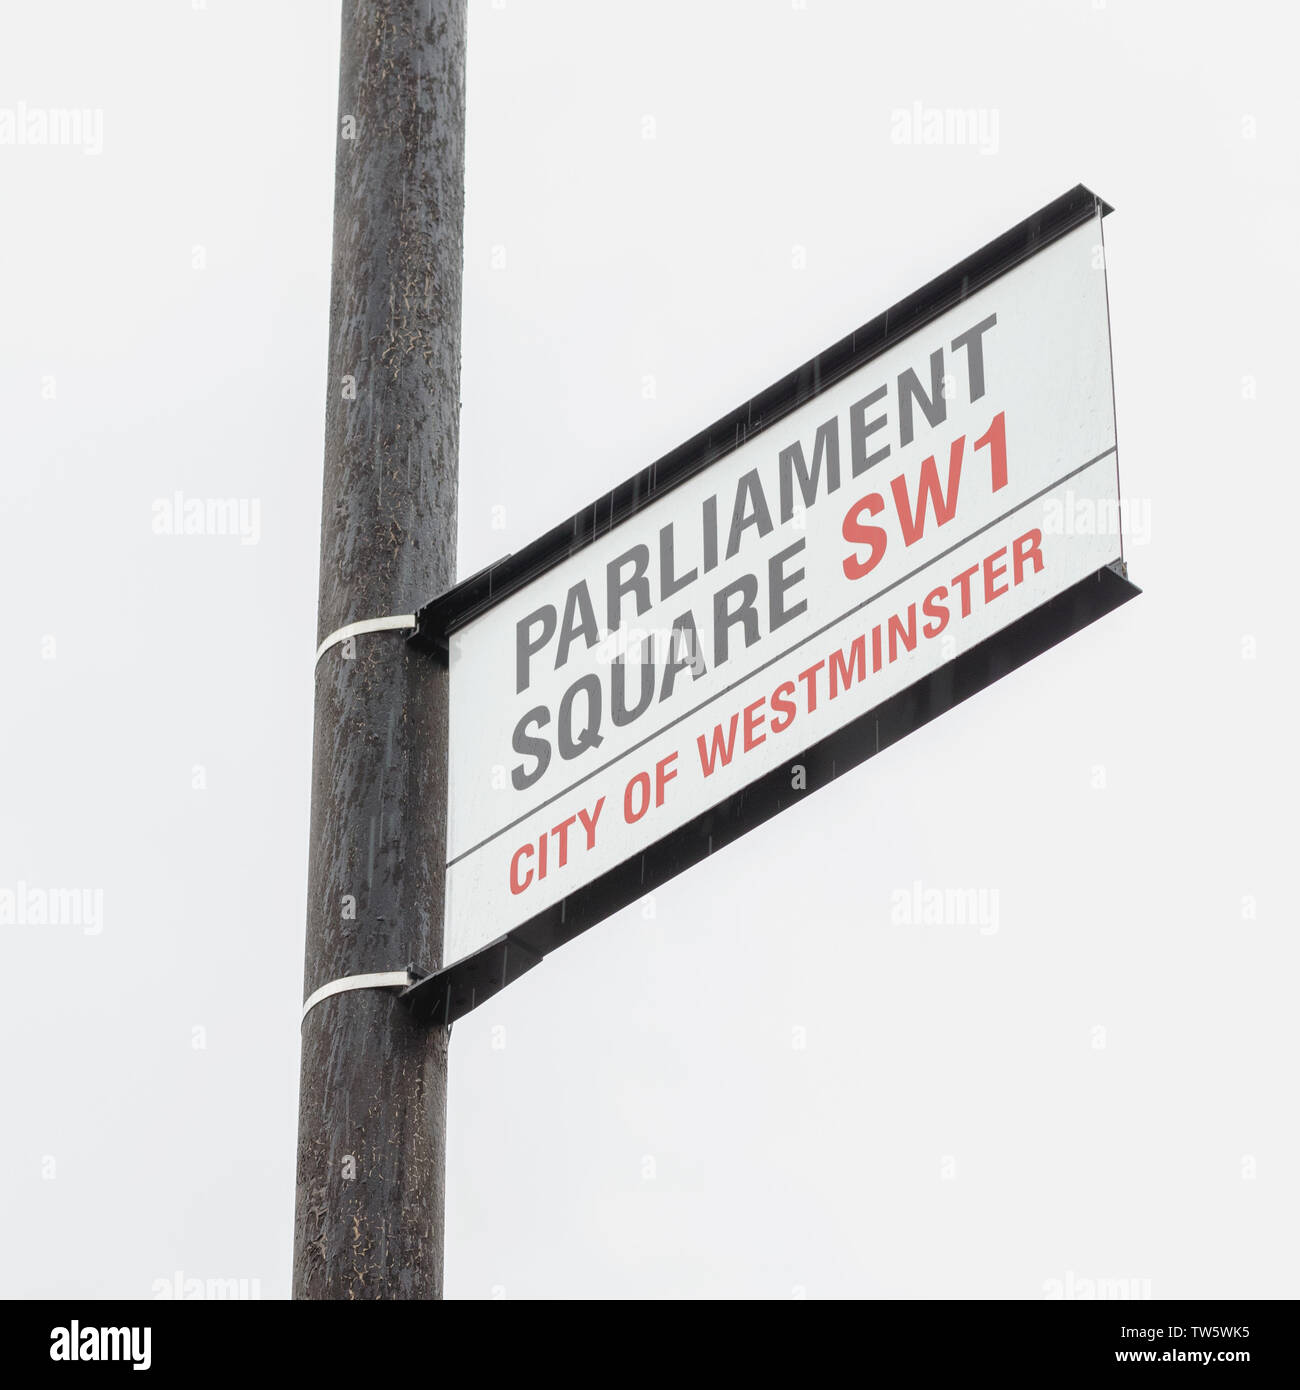 London / UK - June 18th 2019 - 'Parliament Square' sign in Westminster, South West London Stock Photo